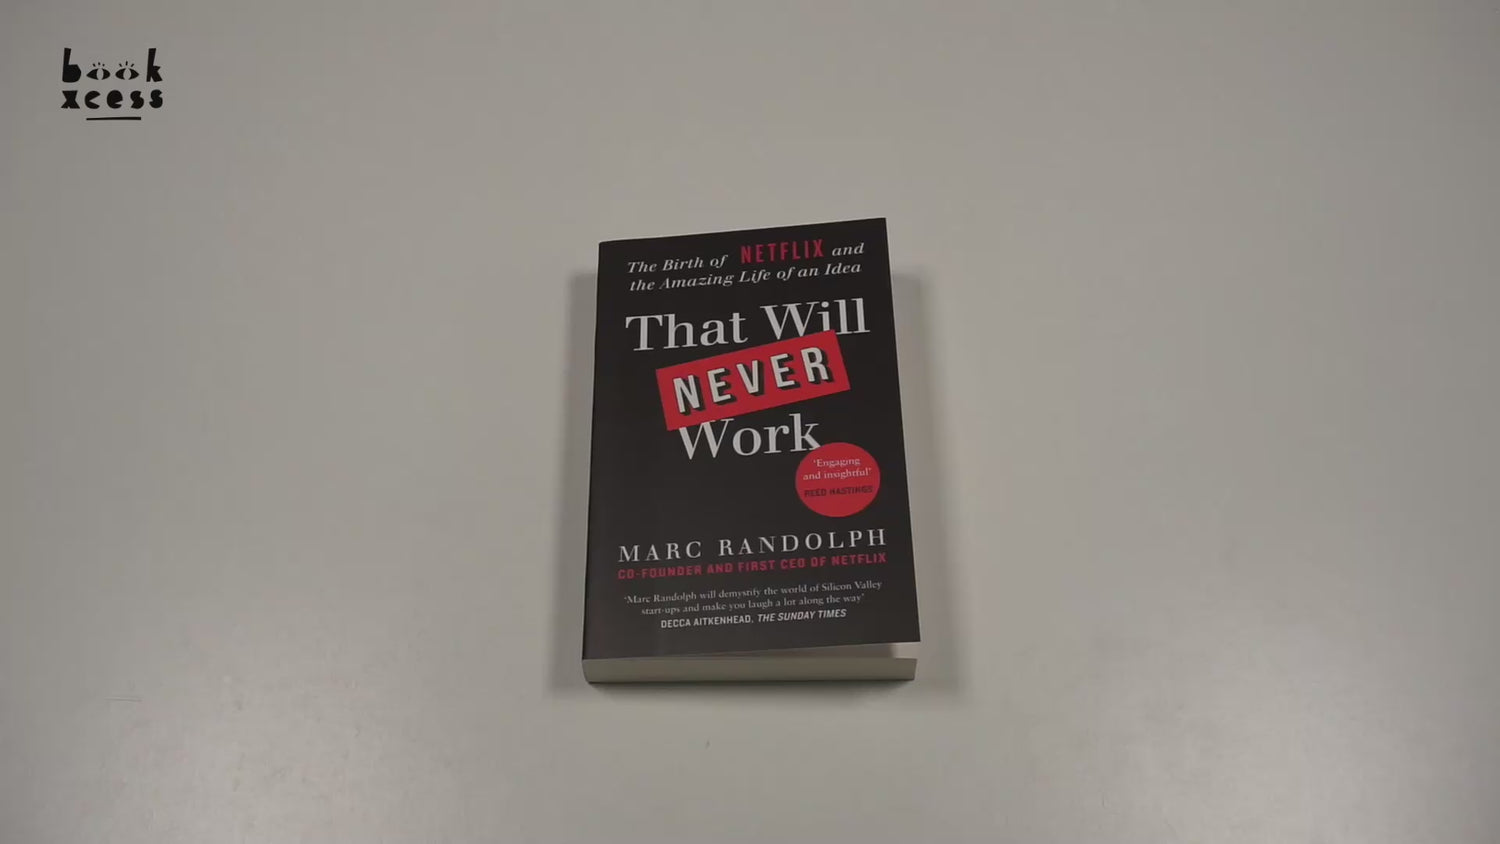  That Will Never Work: The Birth of Netflix and the Amazing Life  of an Idea - Randolph, Marc - Livres